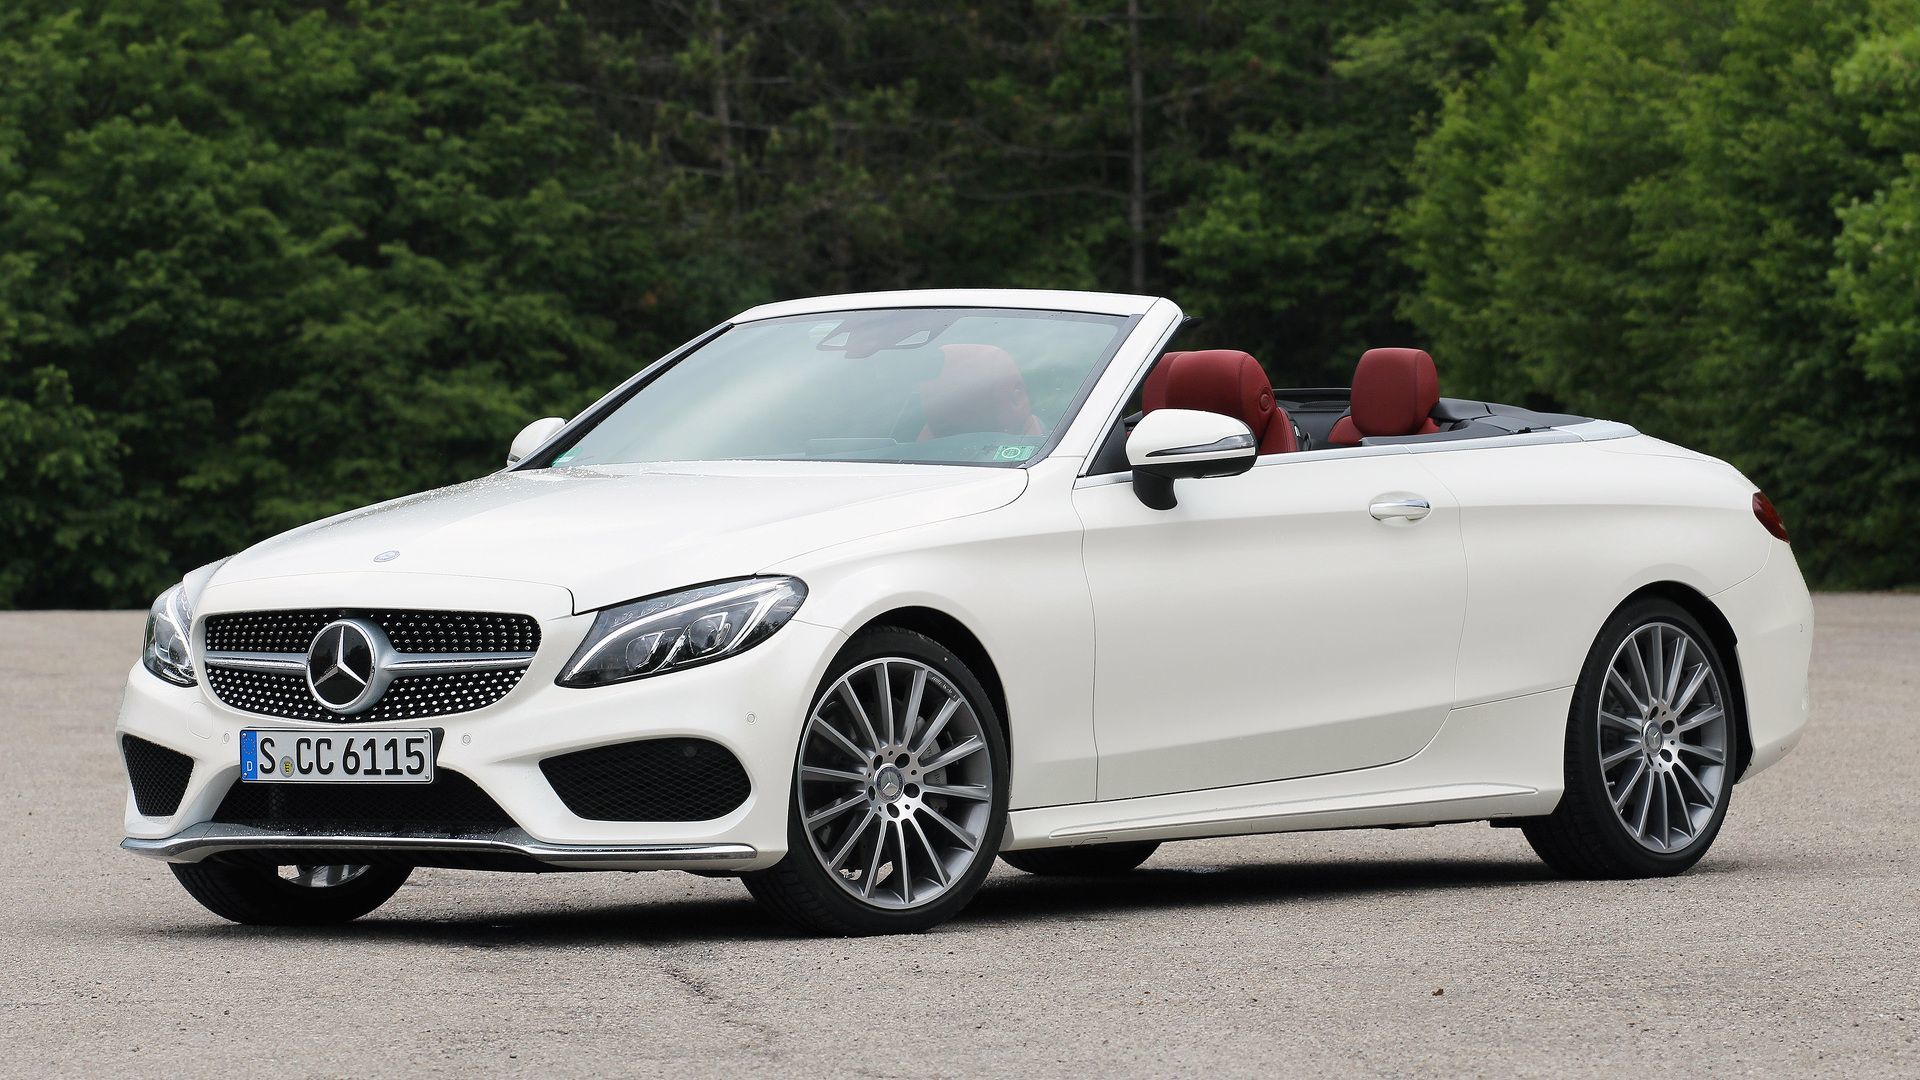 Review of the 2019 Mercedes Benz C 300 4MATIC Cabriolet